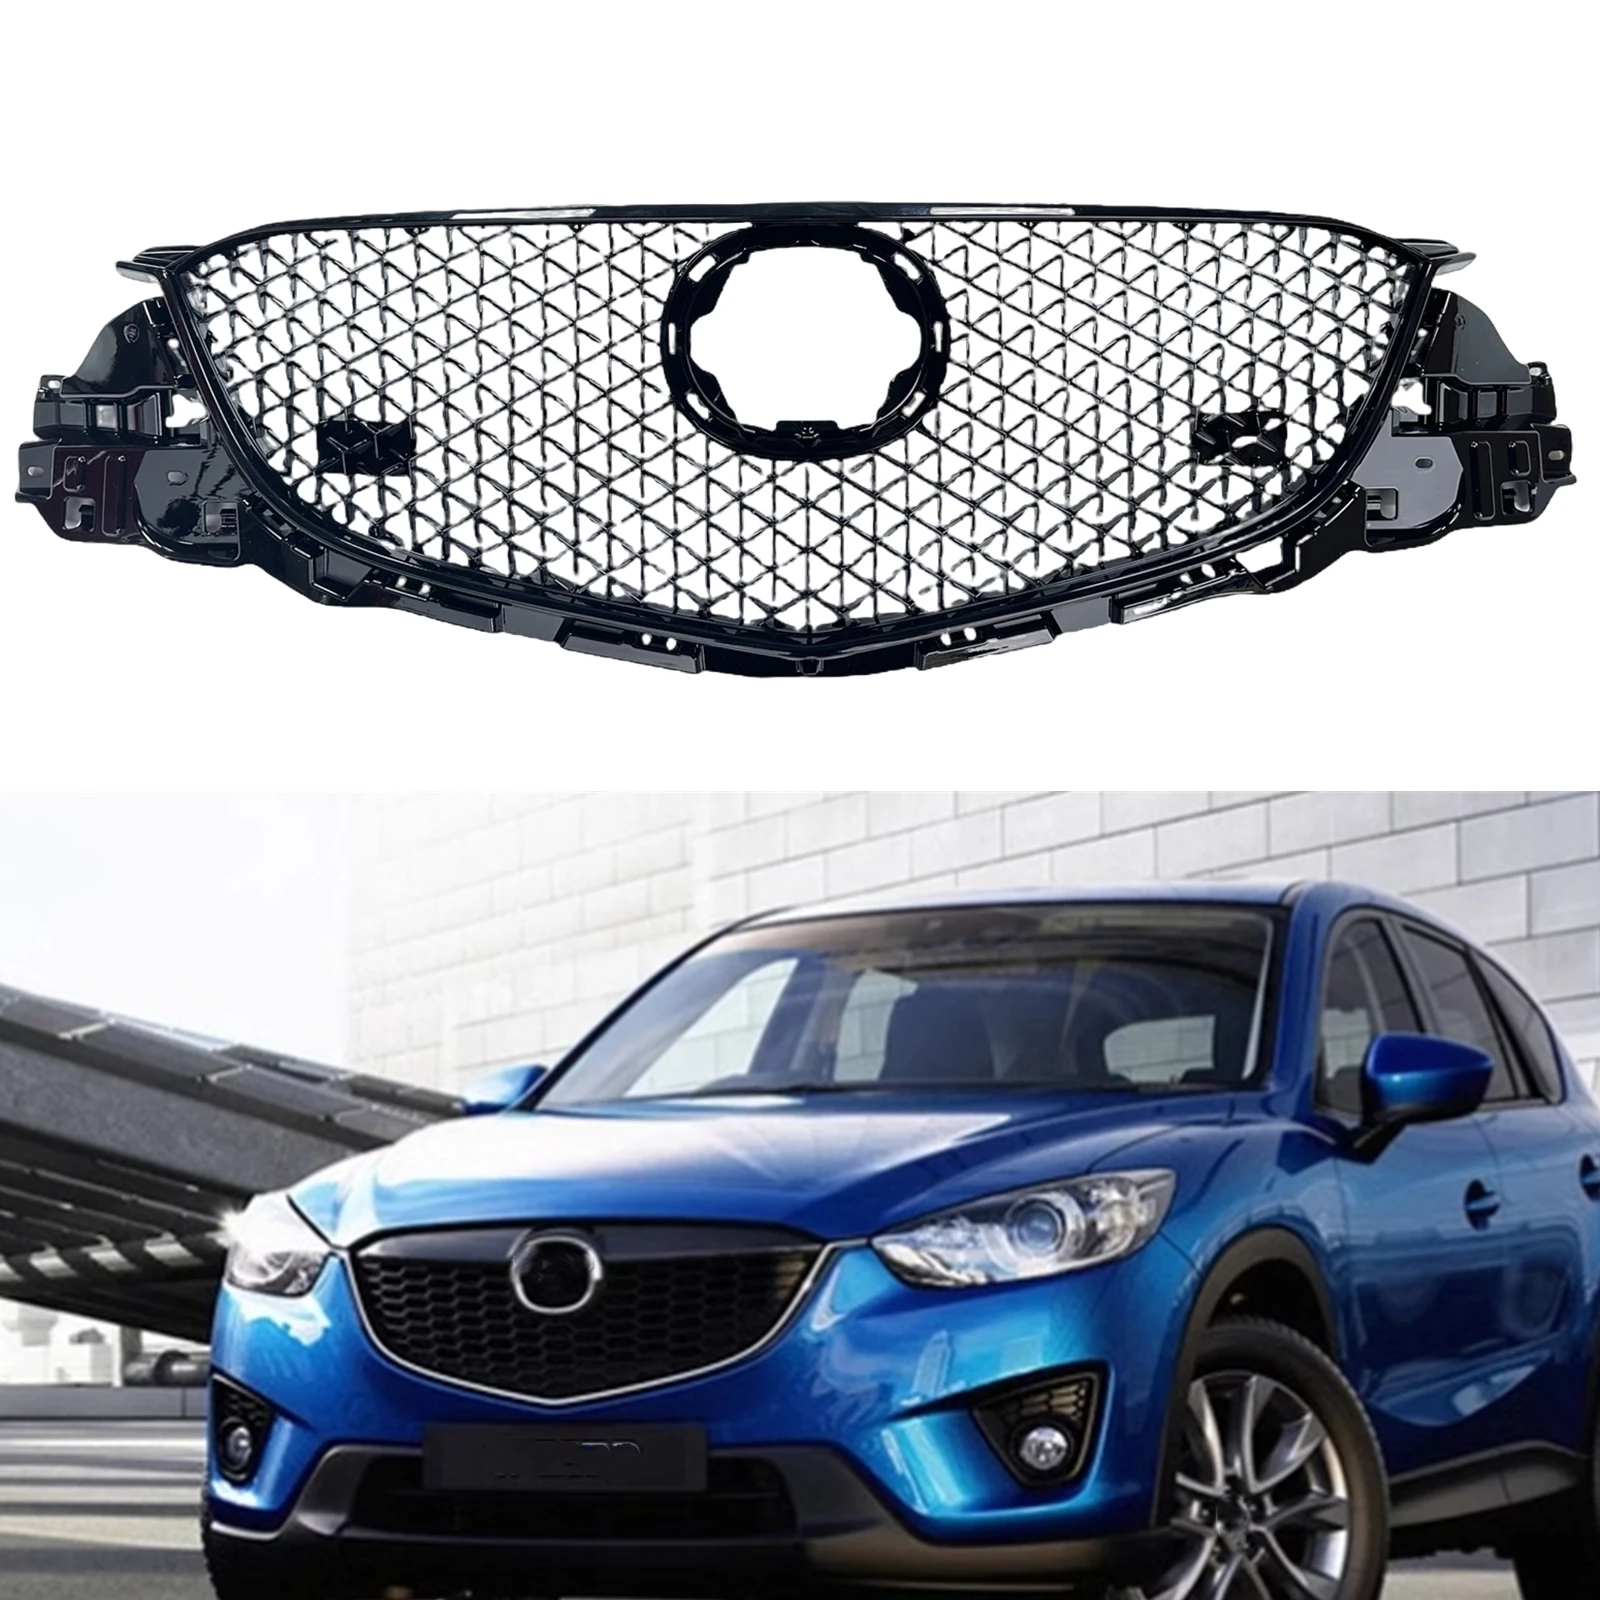 

Front Grille For Mazda CX5 2013 2014 2015 2016 Racing Grill Gloss Black Honeycomb Style Car Upper Bumper Hood Mesh Radiator Grid